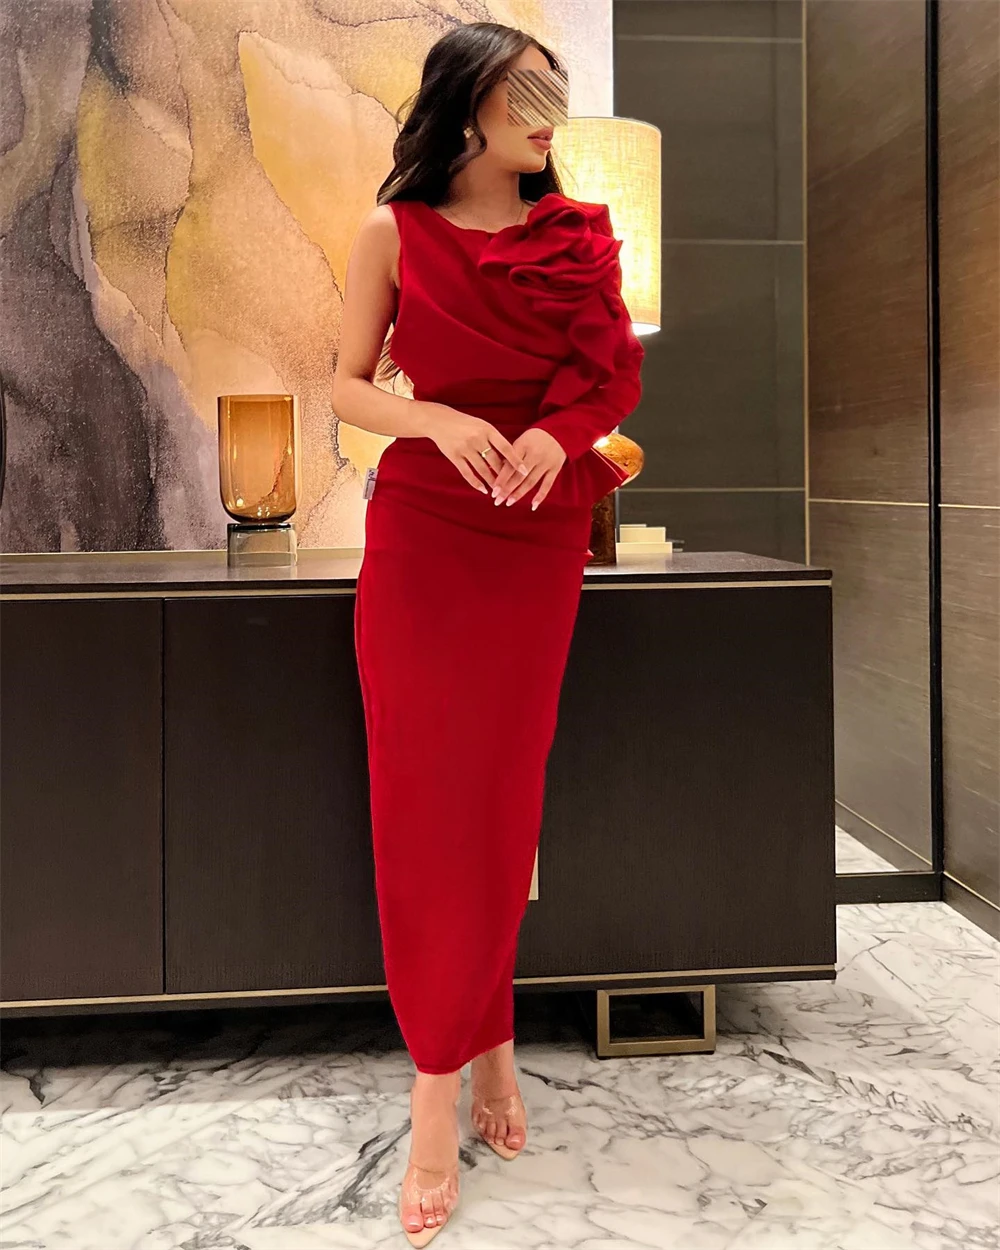 

Prom Dresses Fashion O-Neck Sheath Ruched Celebrity Dress Long Sleeve Tank Slit Ankle Length Formal Evening Gowns فساتين الحفلات